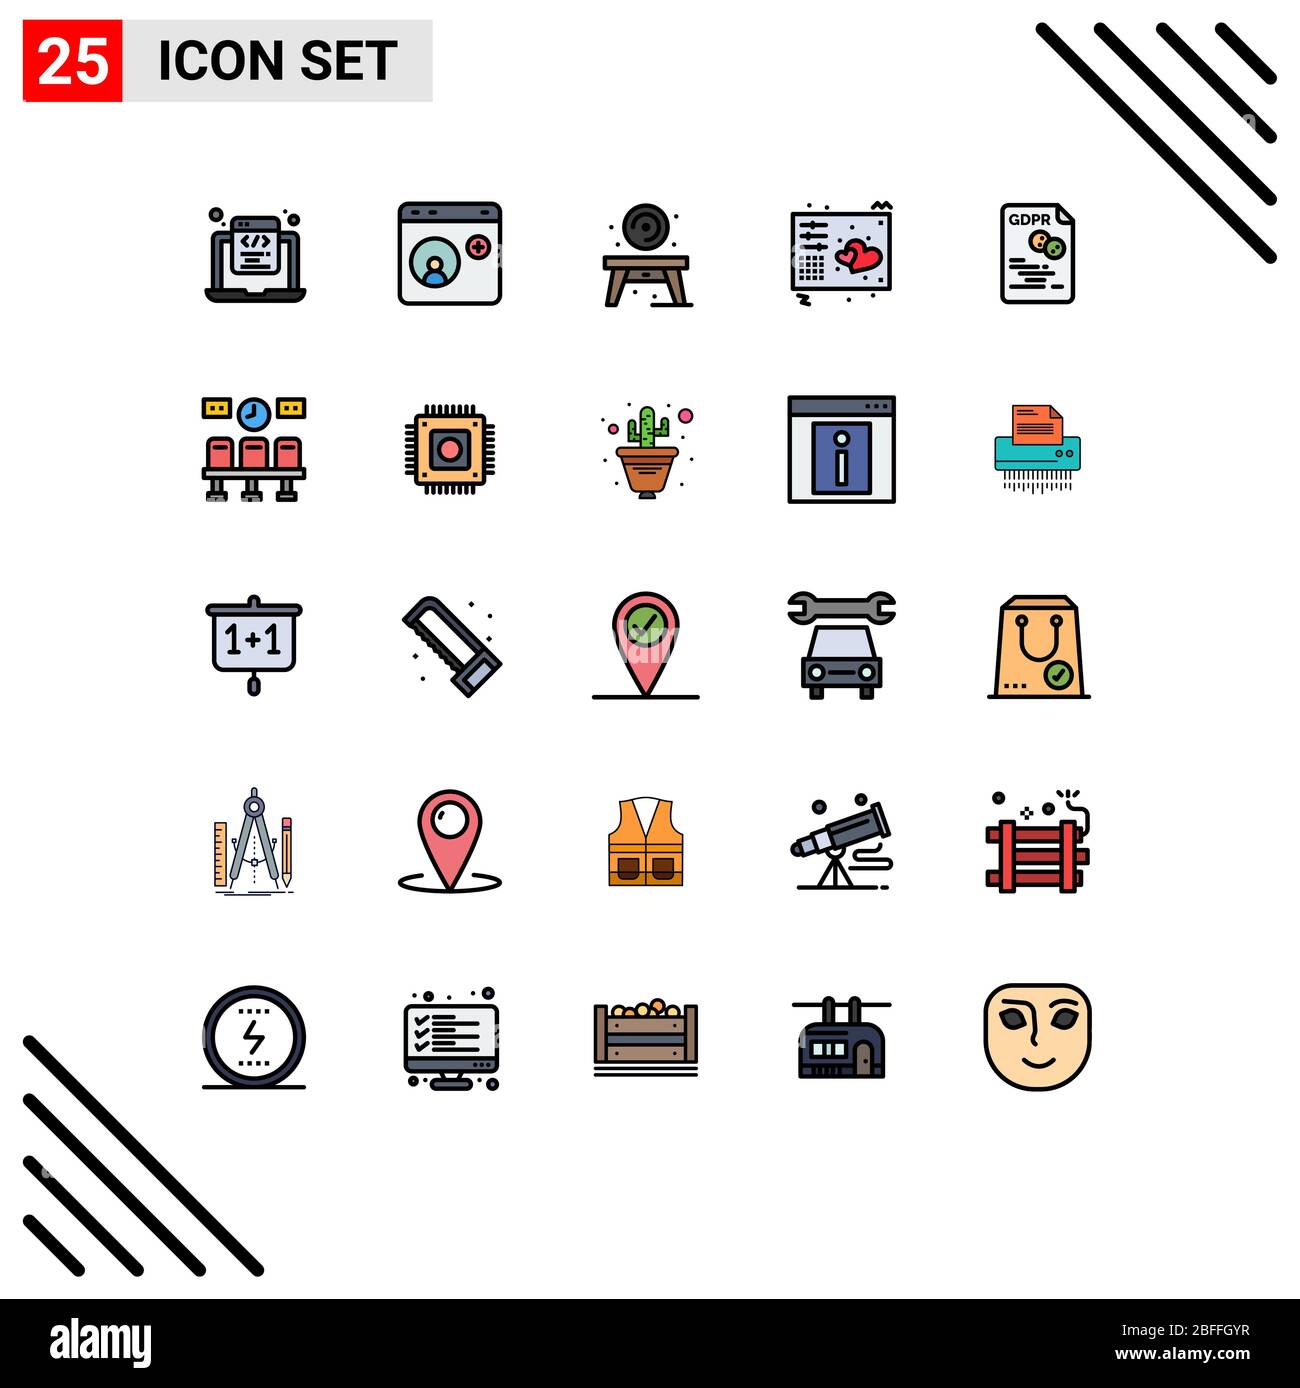 Set of 25 Modern UI Icons Symbols Signs for midi, controller, internet, love, table Editable Vector Design Elements Stock Vector